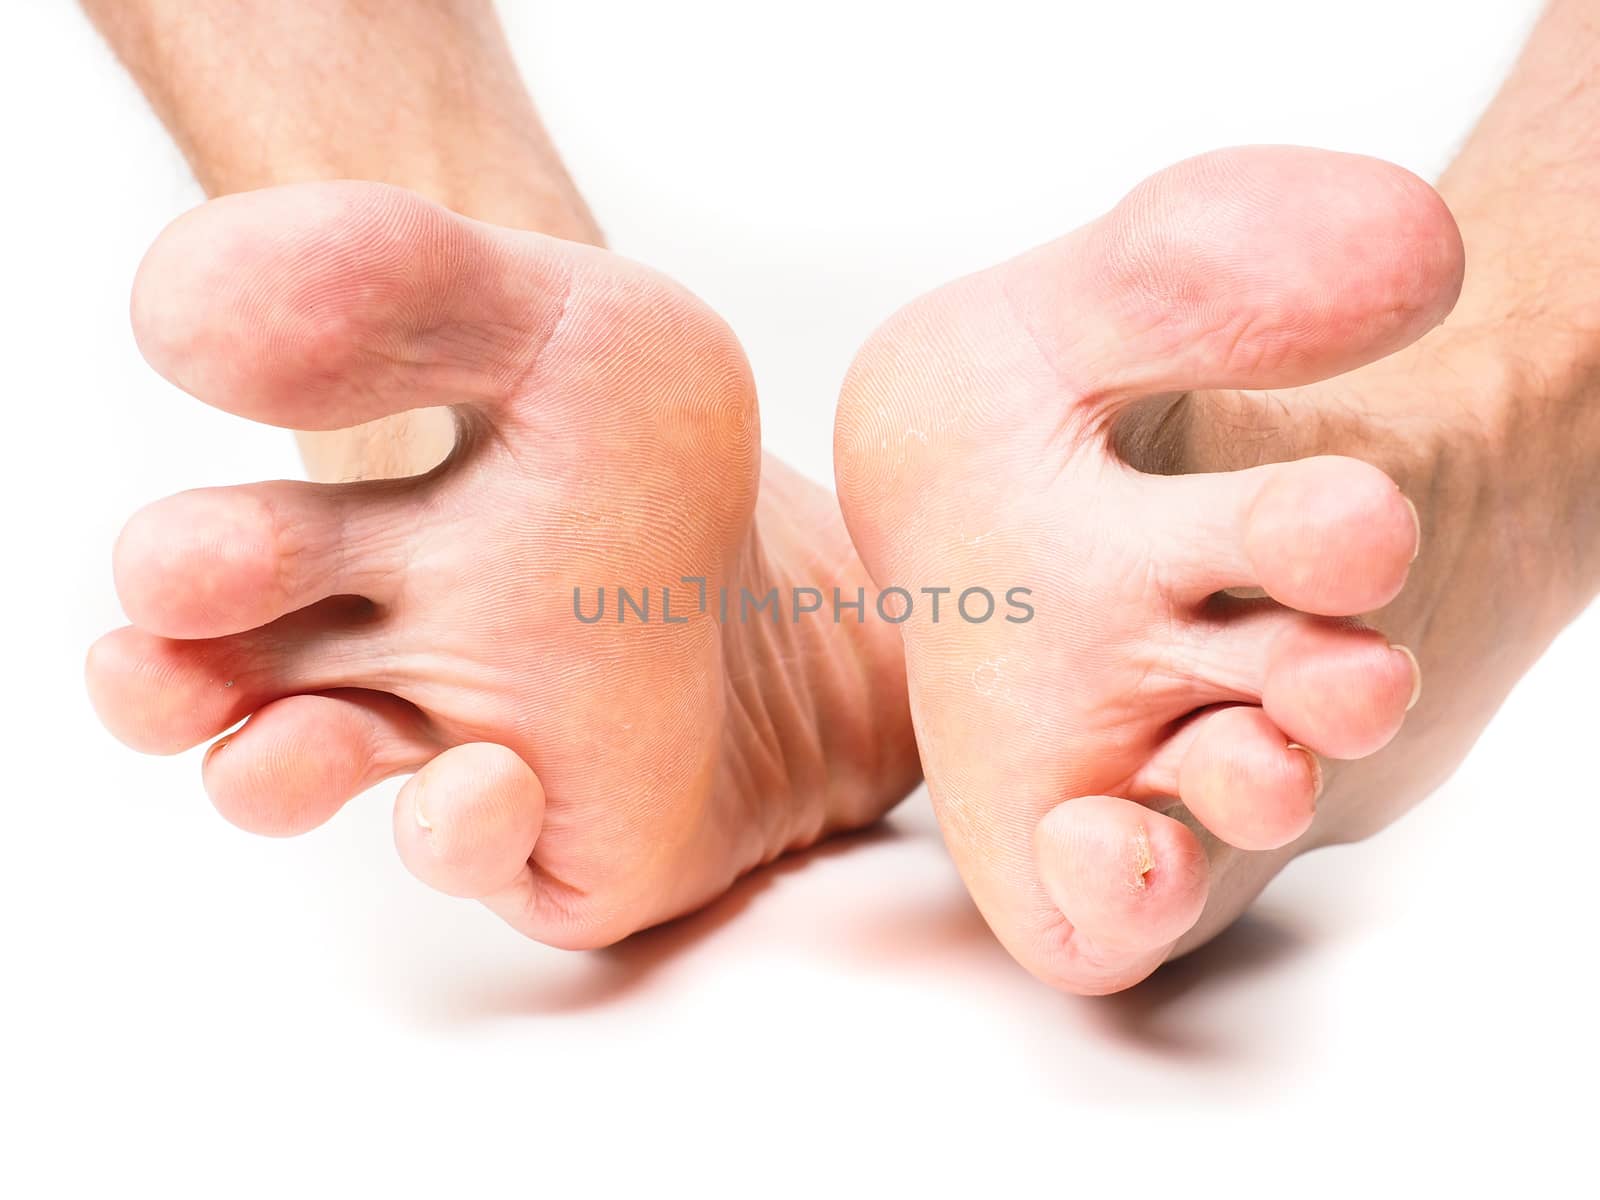 Male person spreading toes by Arvebettum